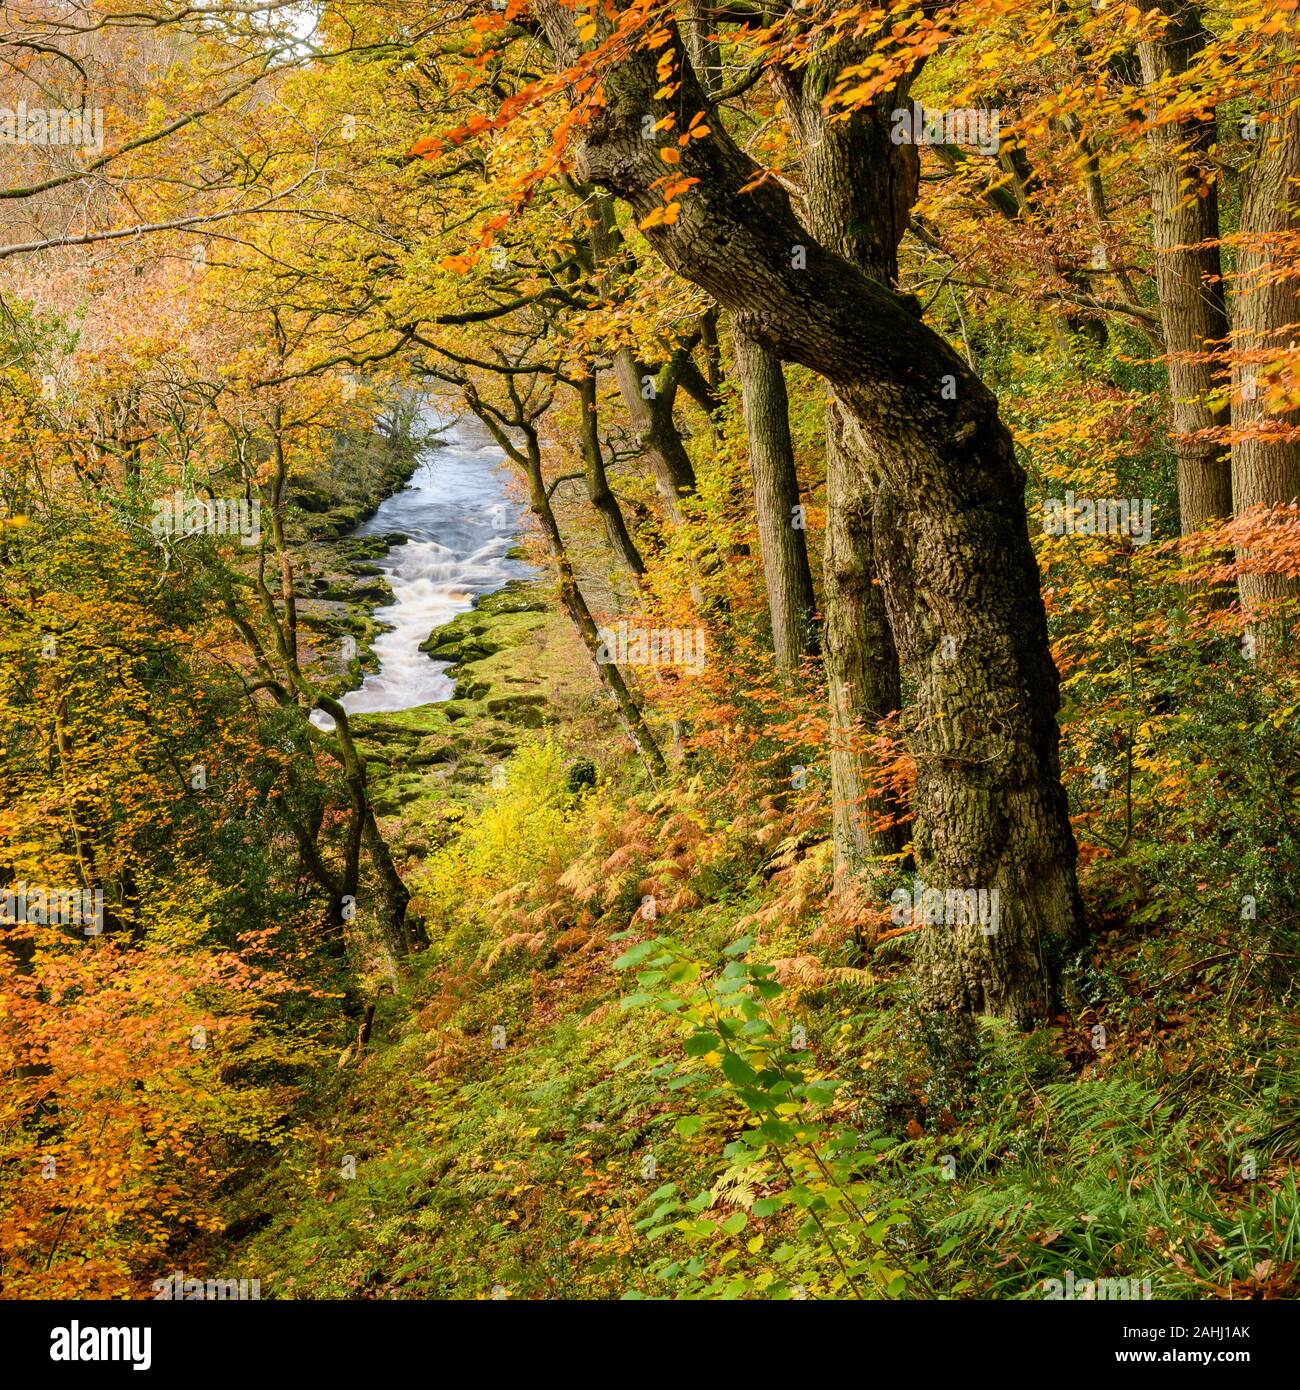 High view of flowing water of River Wharfe in scenic valley & autumn colours of Strid Wood trees - Bolton Abbey Estate, Yorkshire Dales, England, UK. Stock Photo